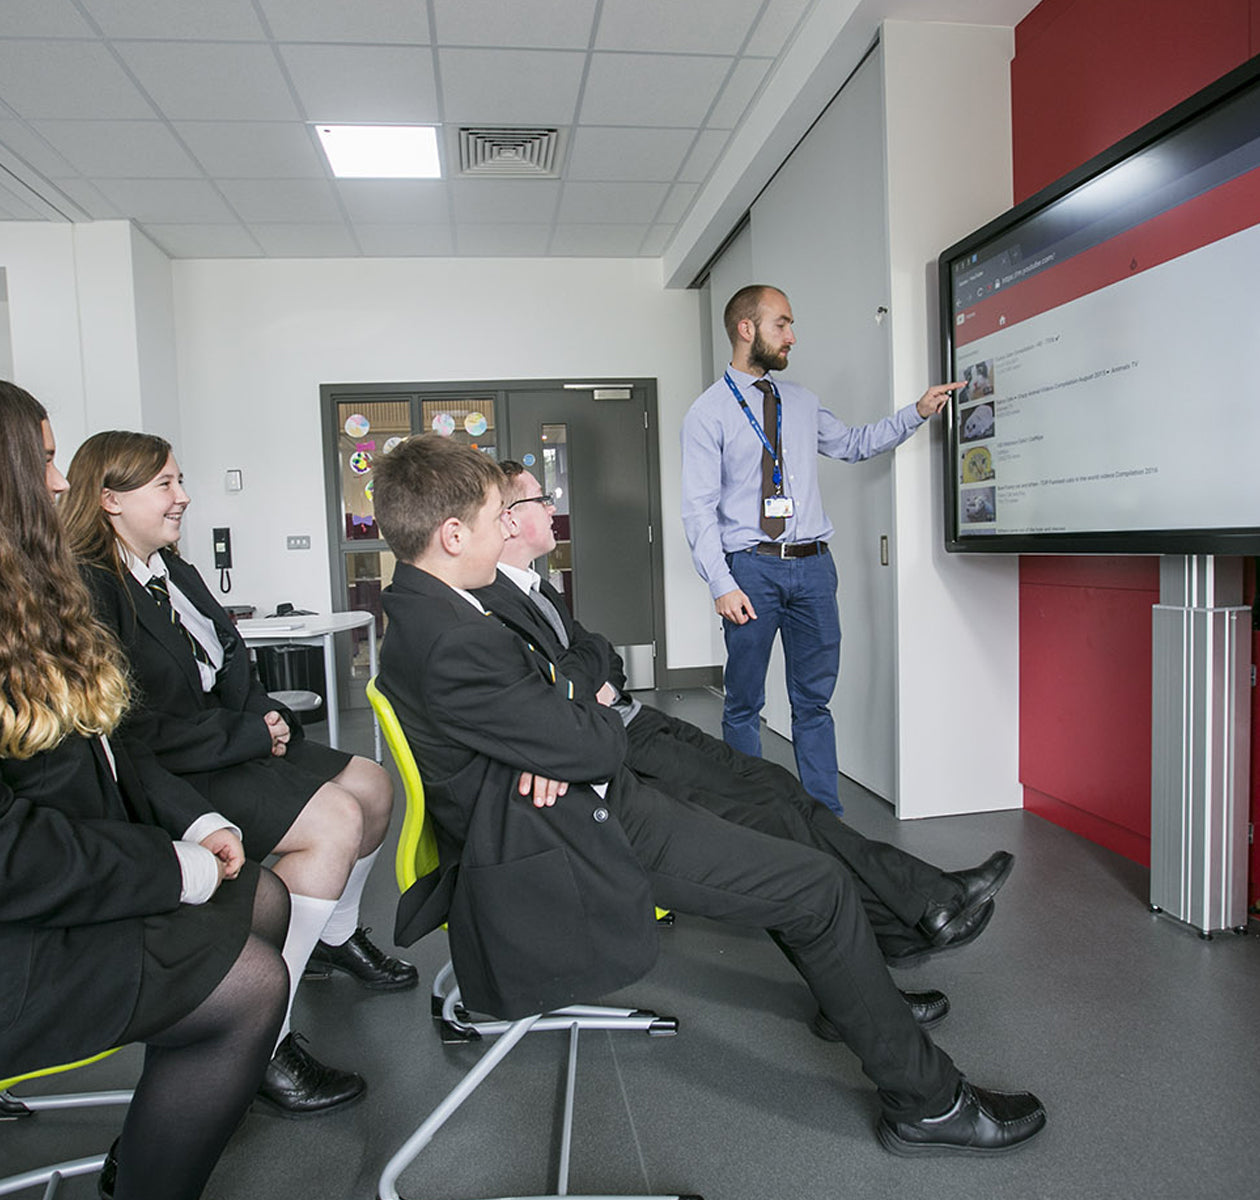 CleverTouch Impact Plus in a classroom